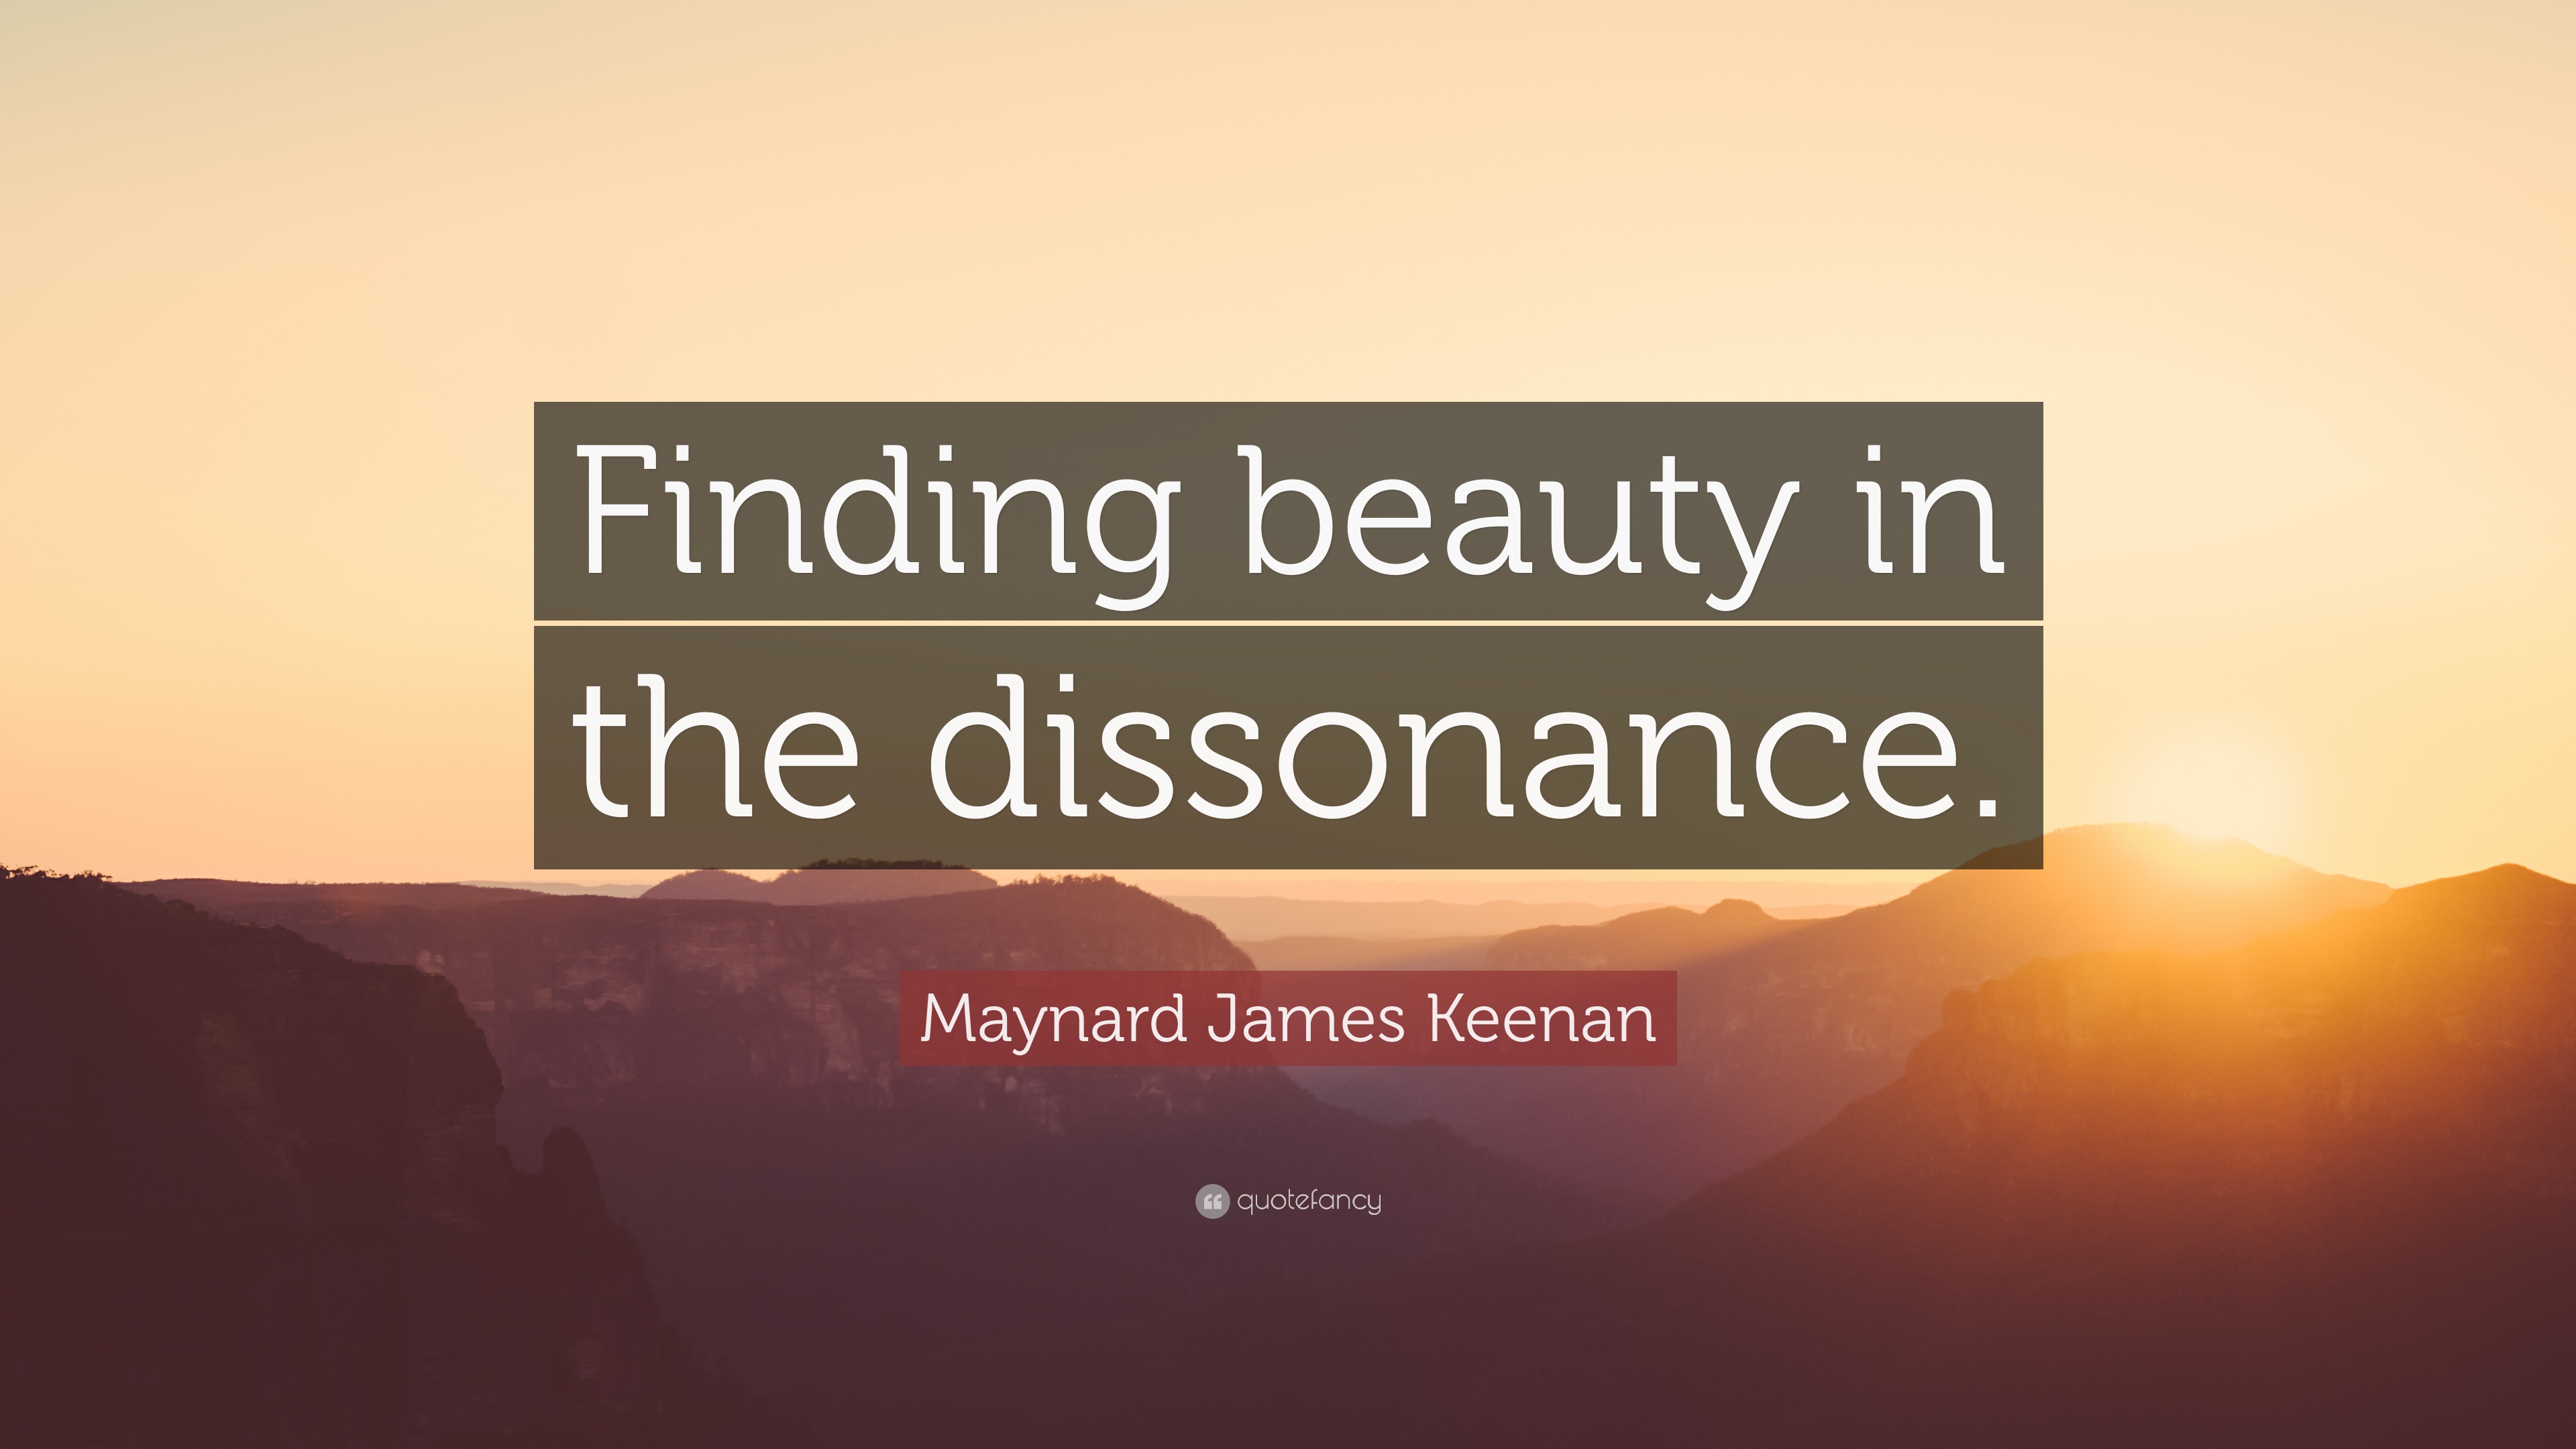 Maynard James Keenan Quote: “Finding beauty in the dissonance.” (12 ...